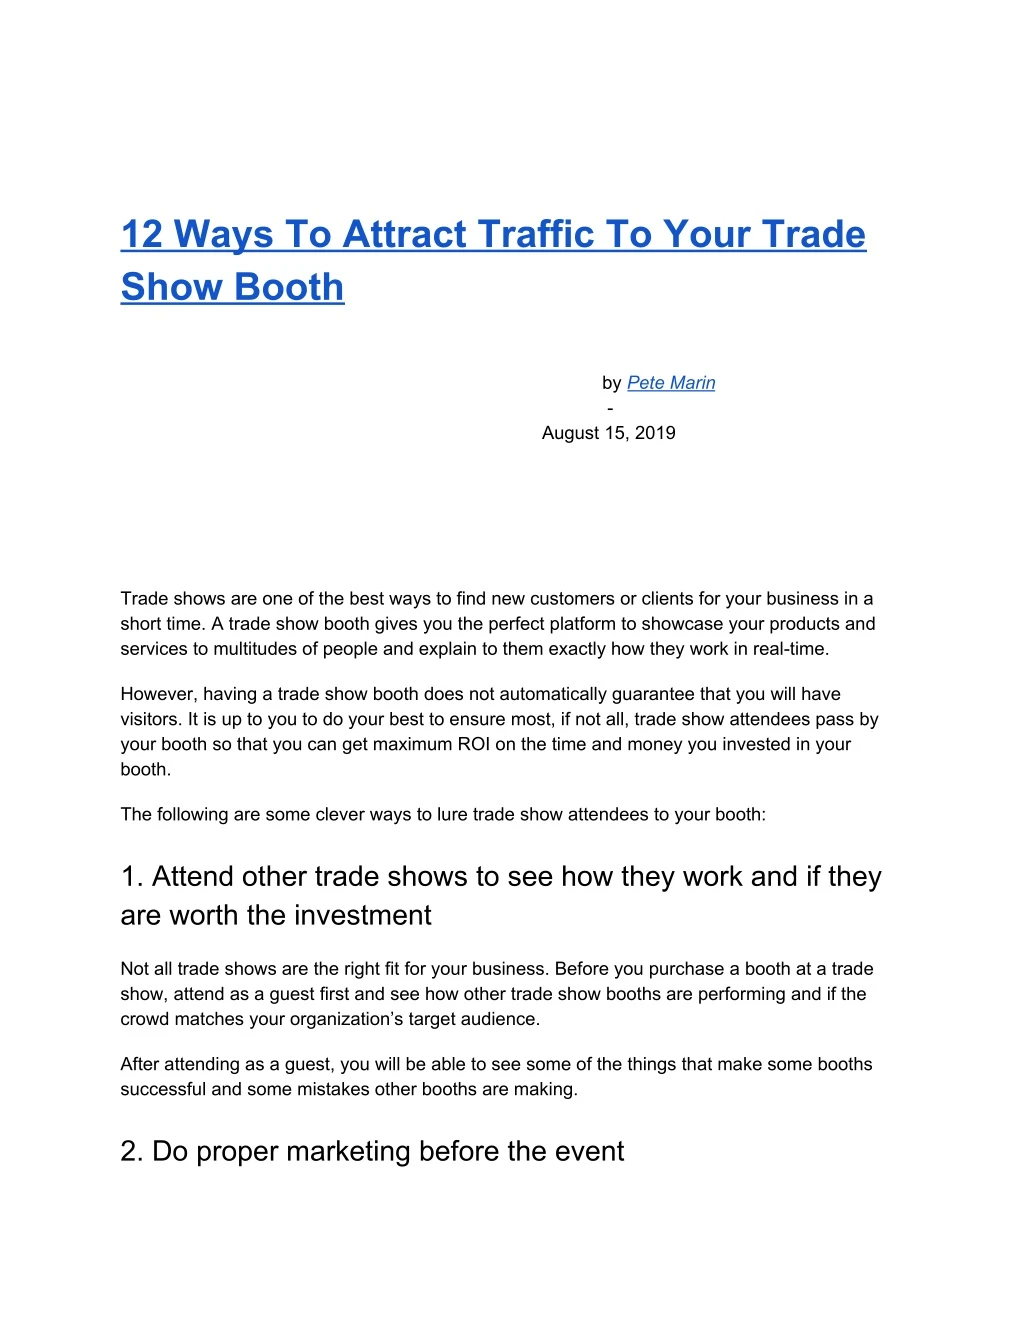 12 ways to attract traffic to your trade show